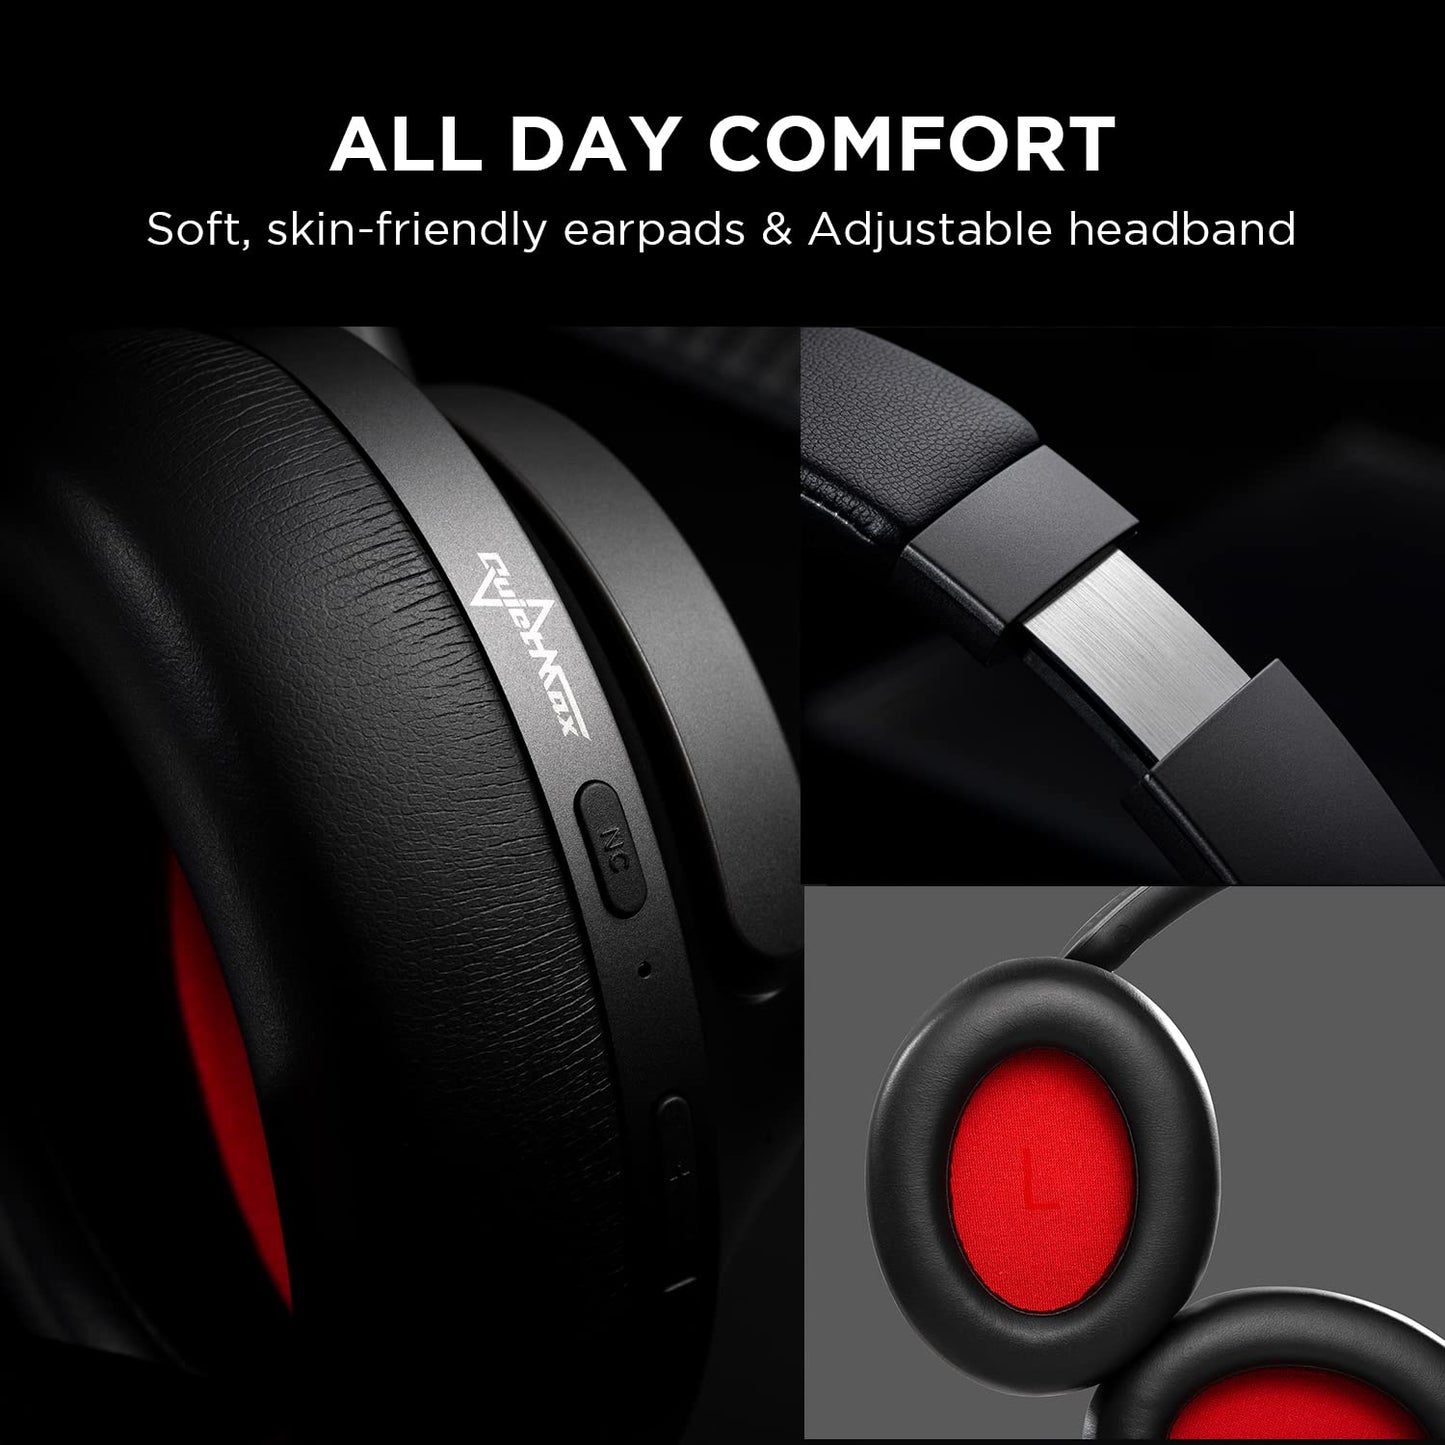 1MORE SonoFlow Active Noise Cancelling Headphones, Bluetooth Headphones with LDAC for Hi-Res Wireless Audio, 70H Playtime, Clear Calls, Preset EQ Via App